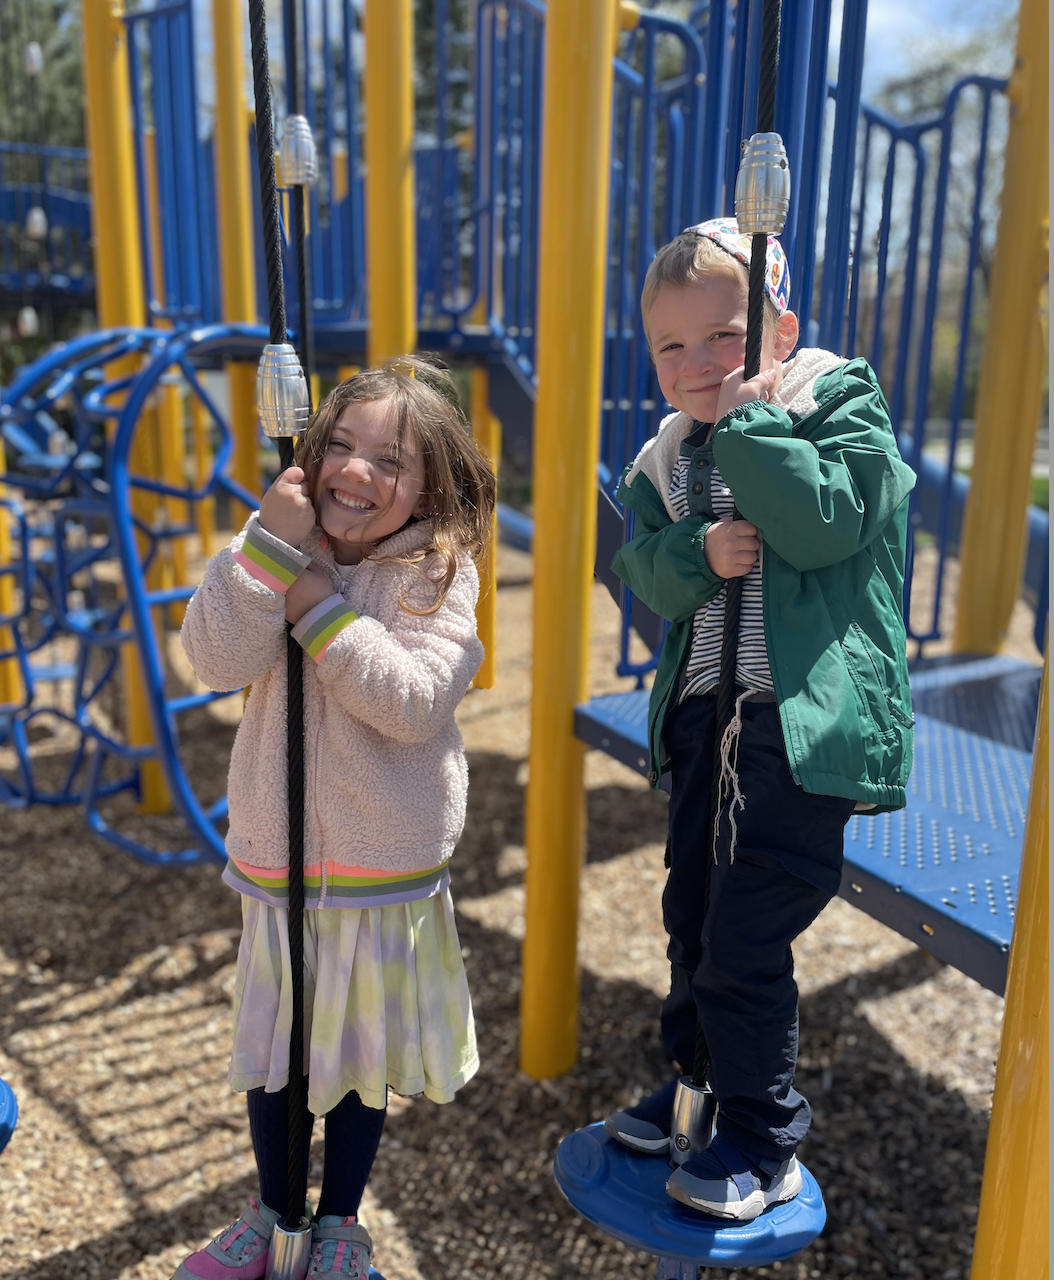 Chicagoland Parks and Recs: Best Playgrounds and Parks for Families in Chicago